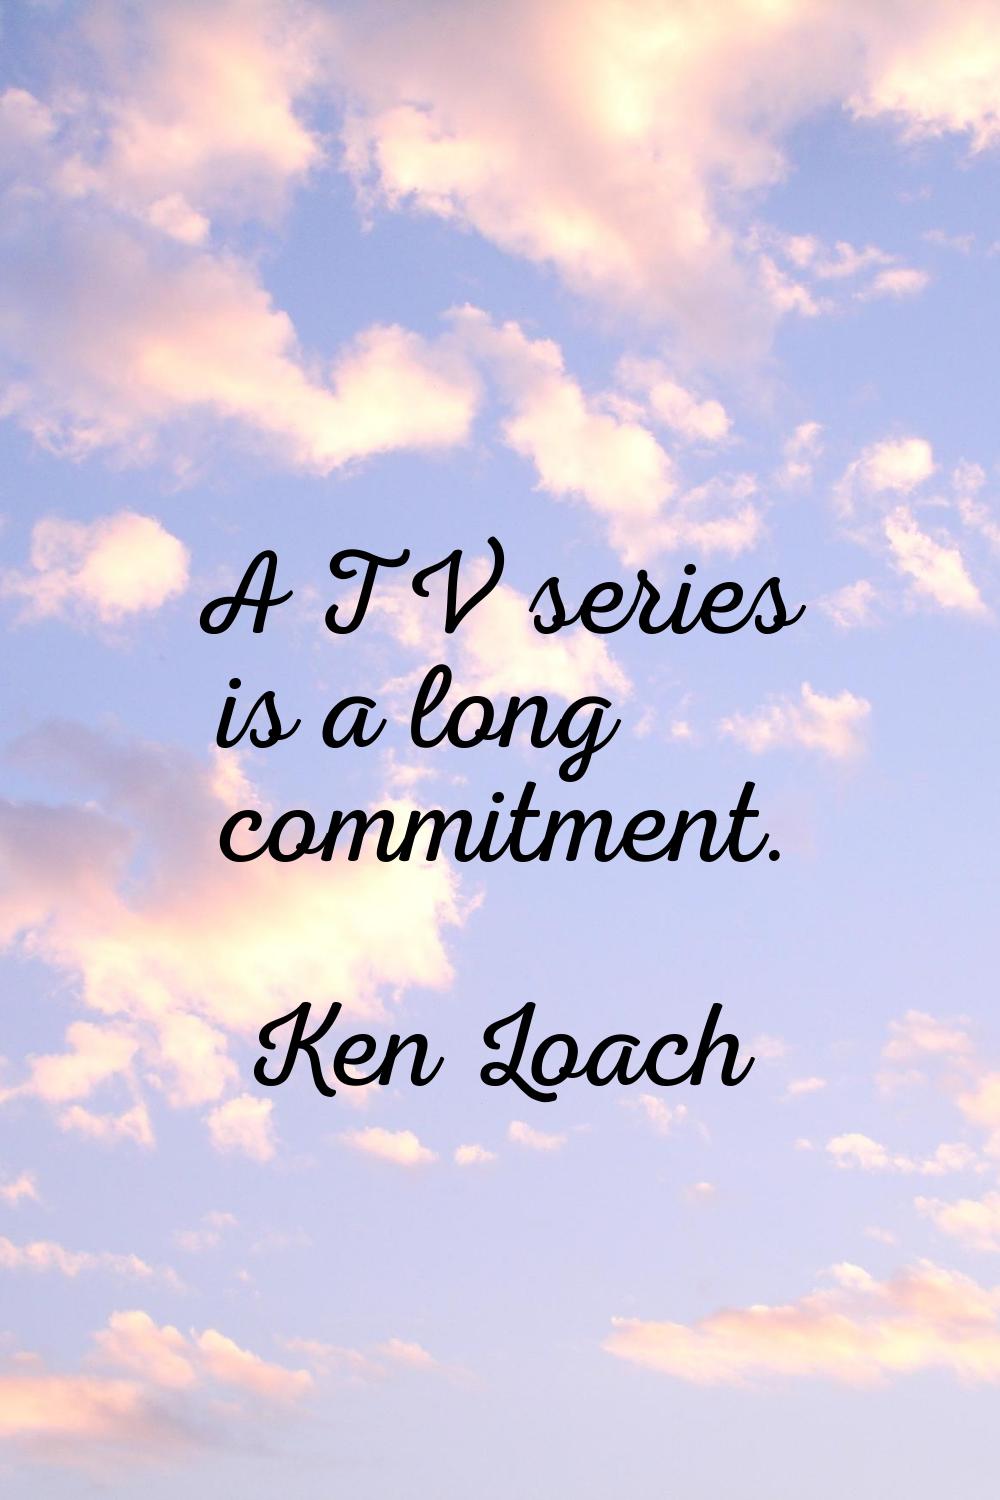 A TV series is a long commitment.